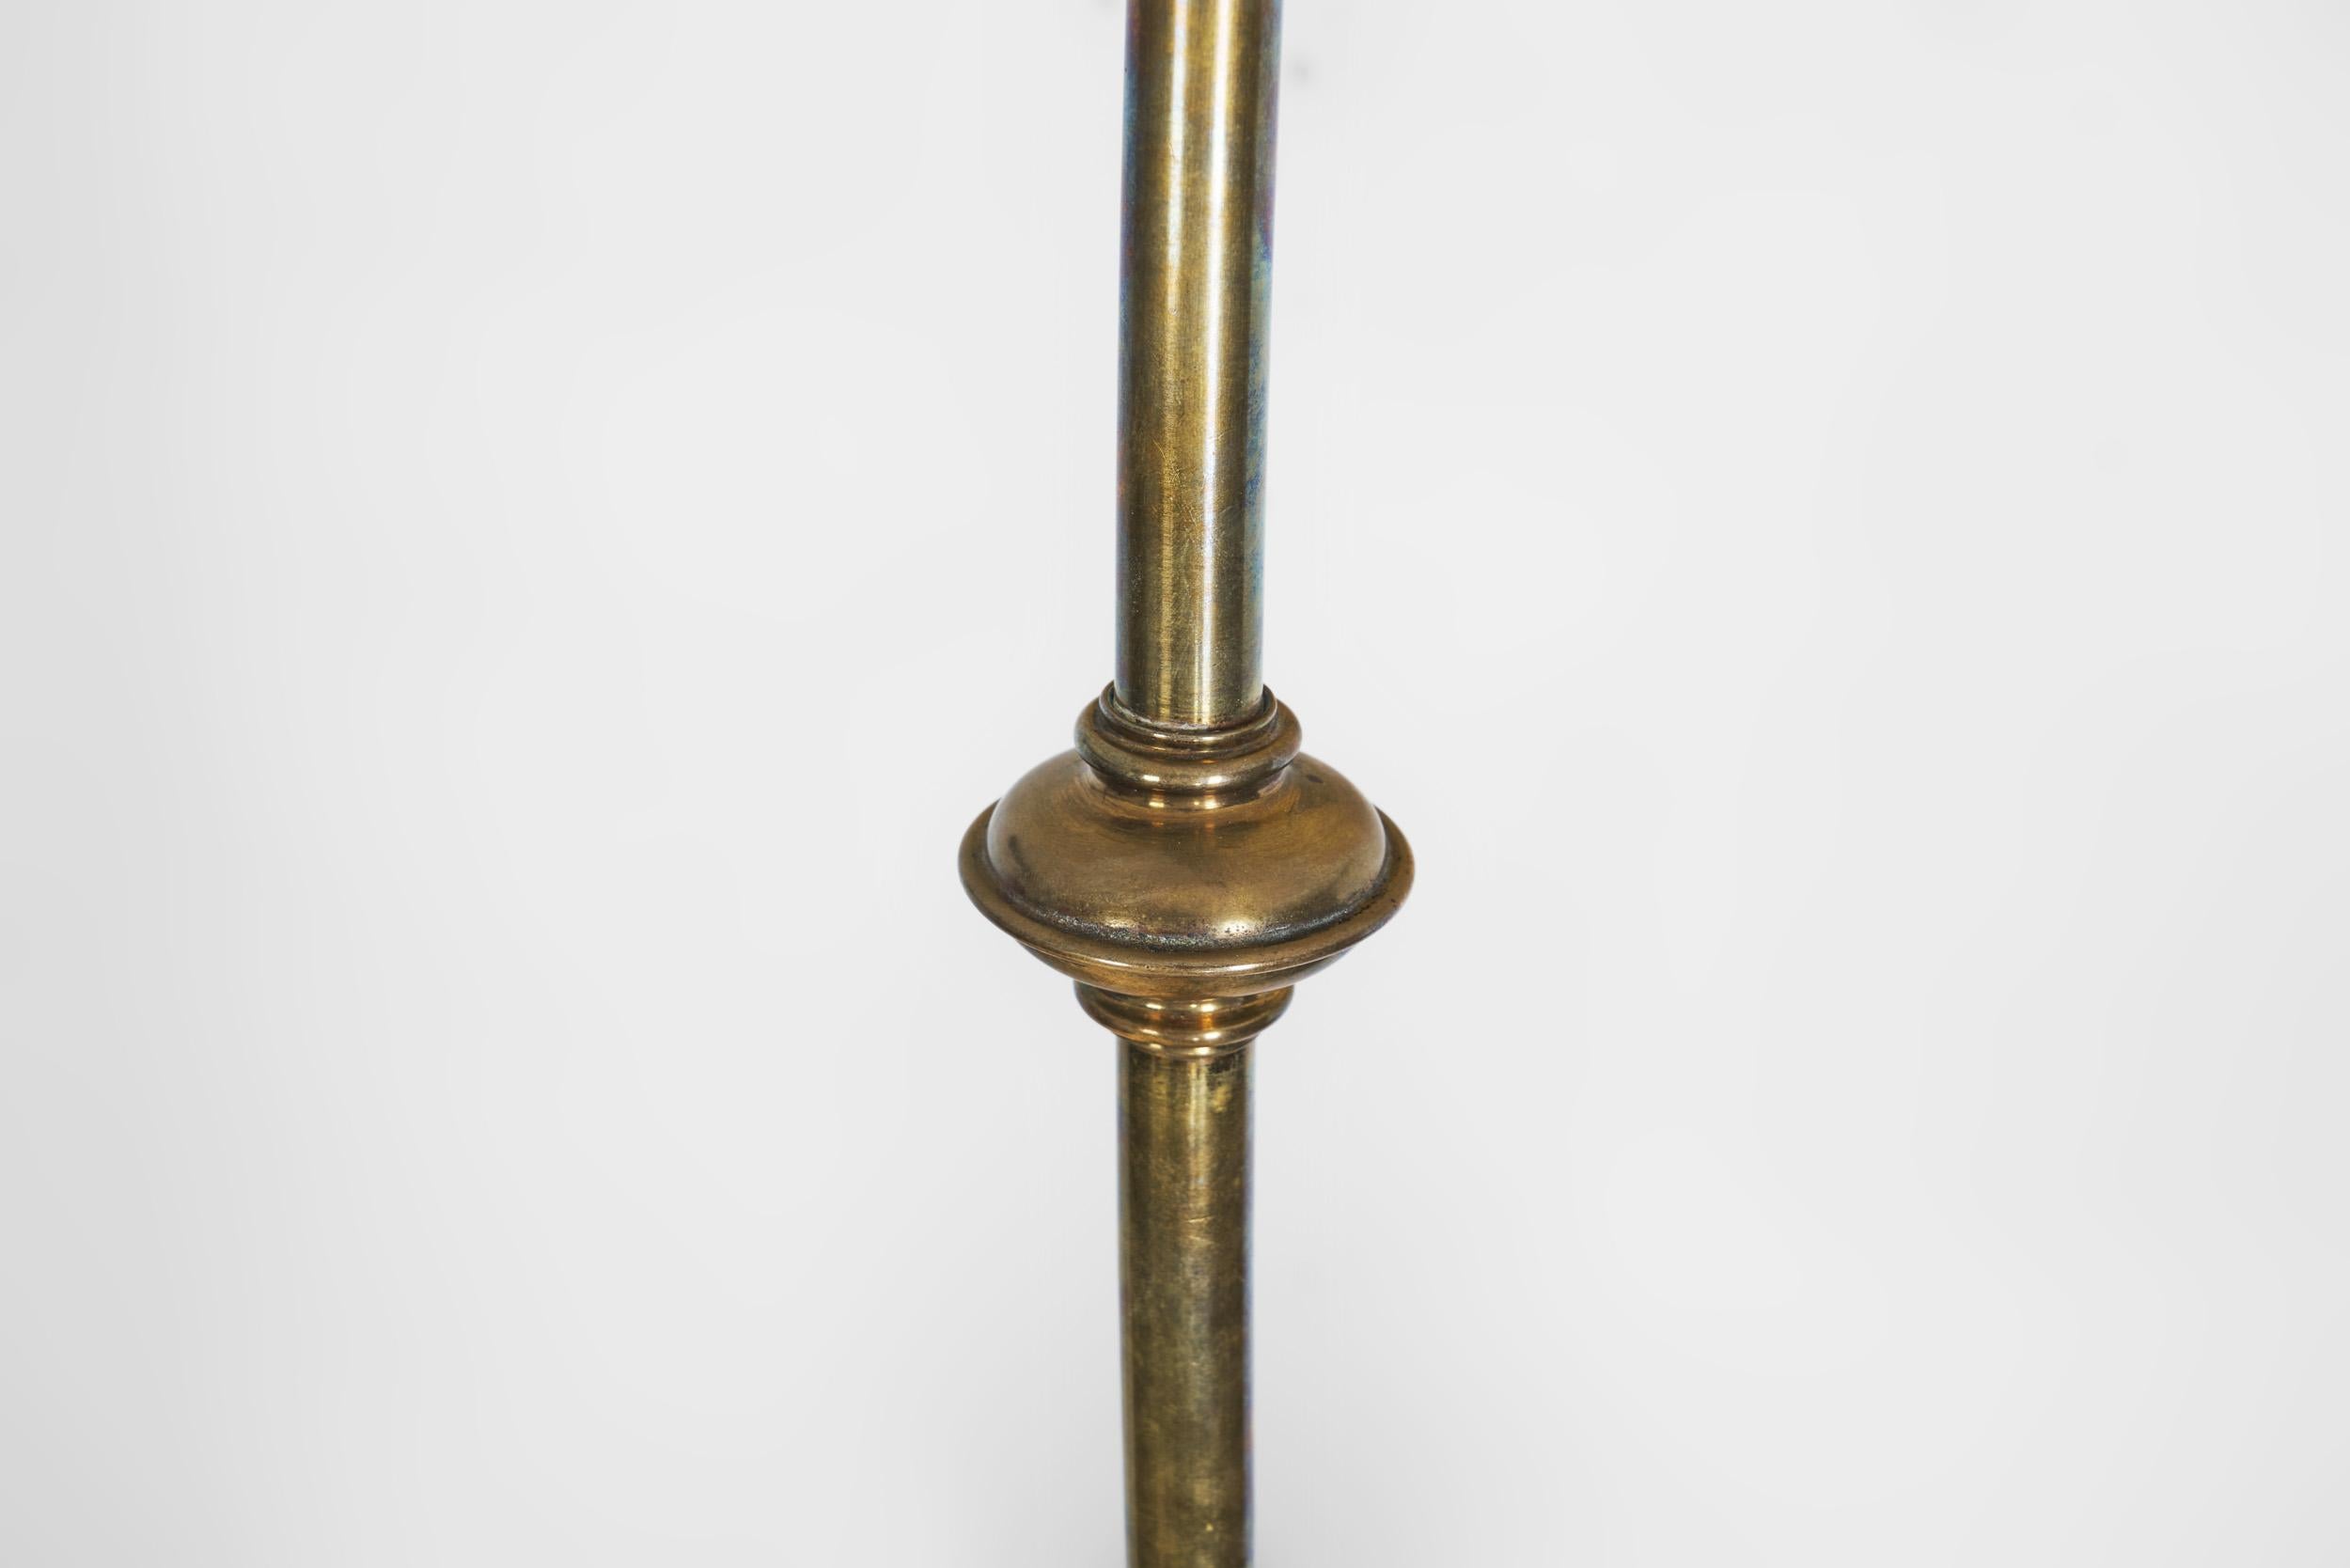 Jugend Ceiling Lamp in Patinated Brass and Glass, Europe early 20th century For Sale 4